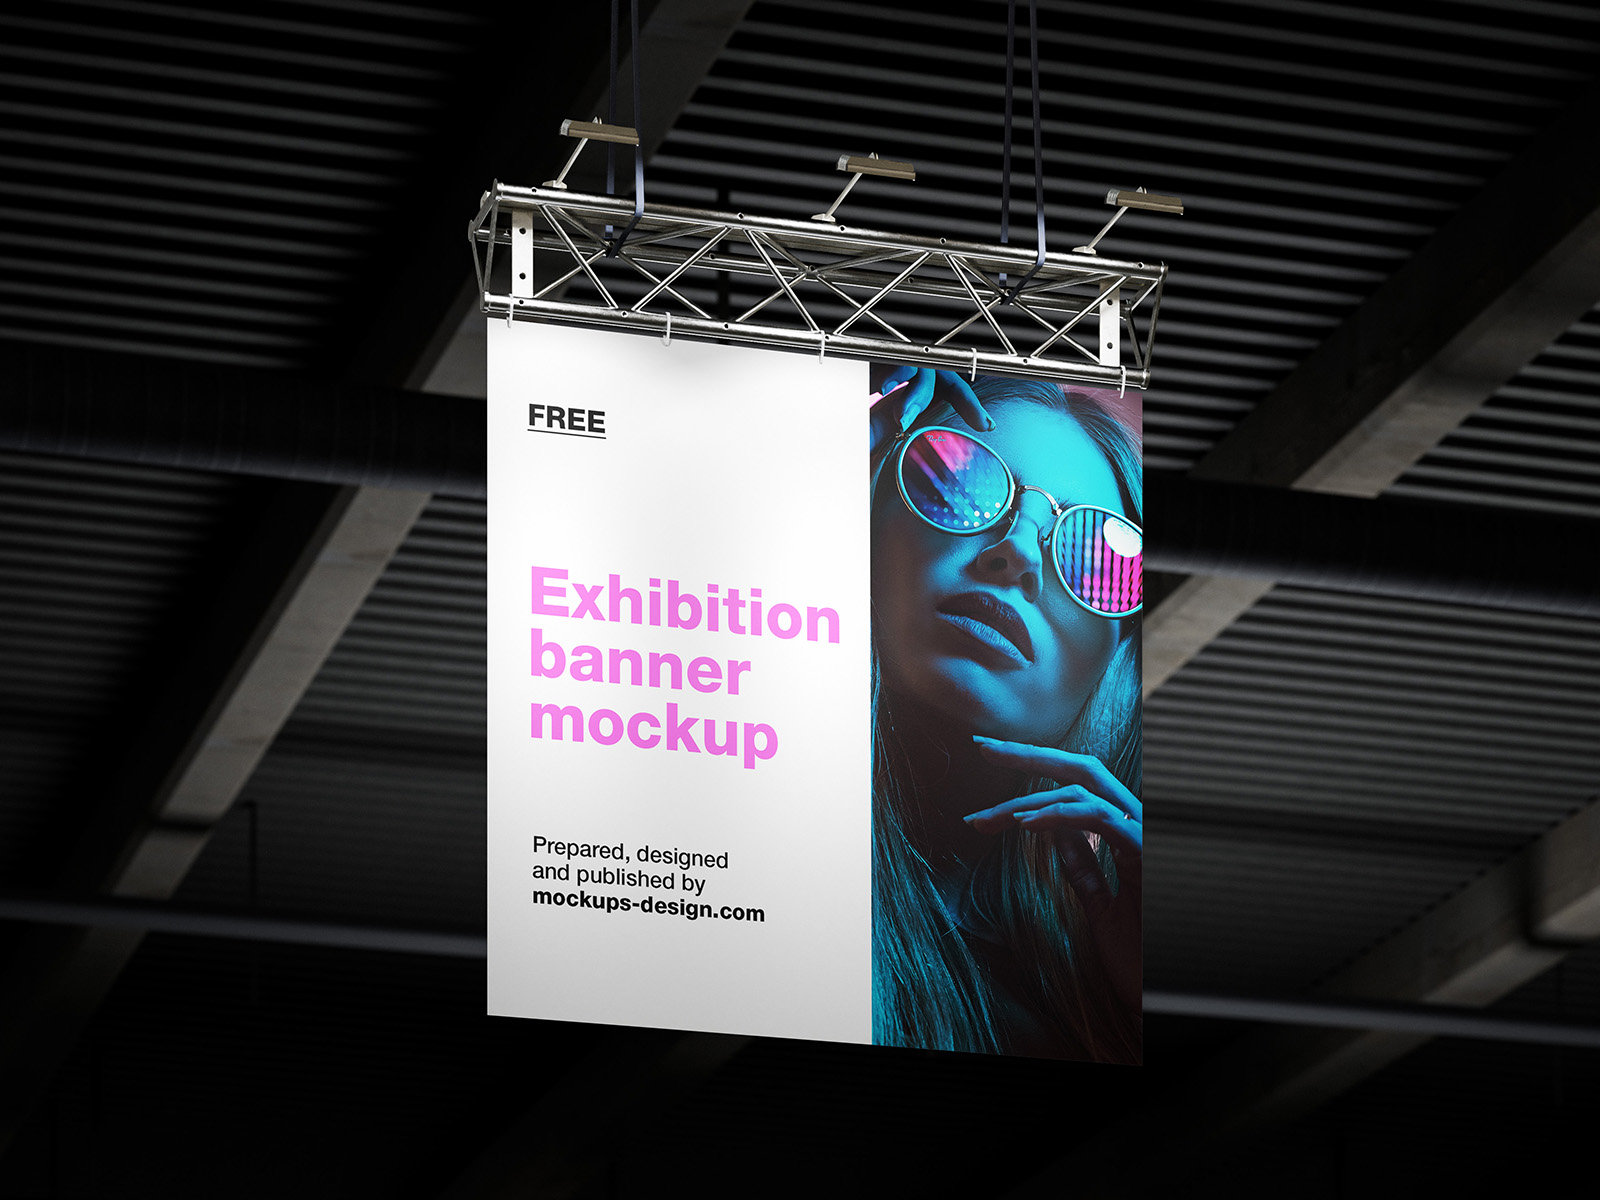 3 Hanging Exhibition Banner Mockups in Perspective Sights FREE PSD